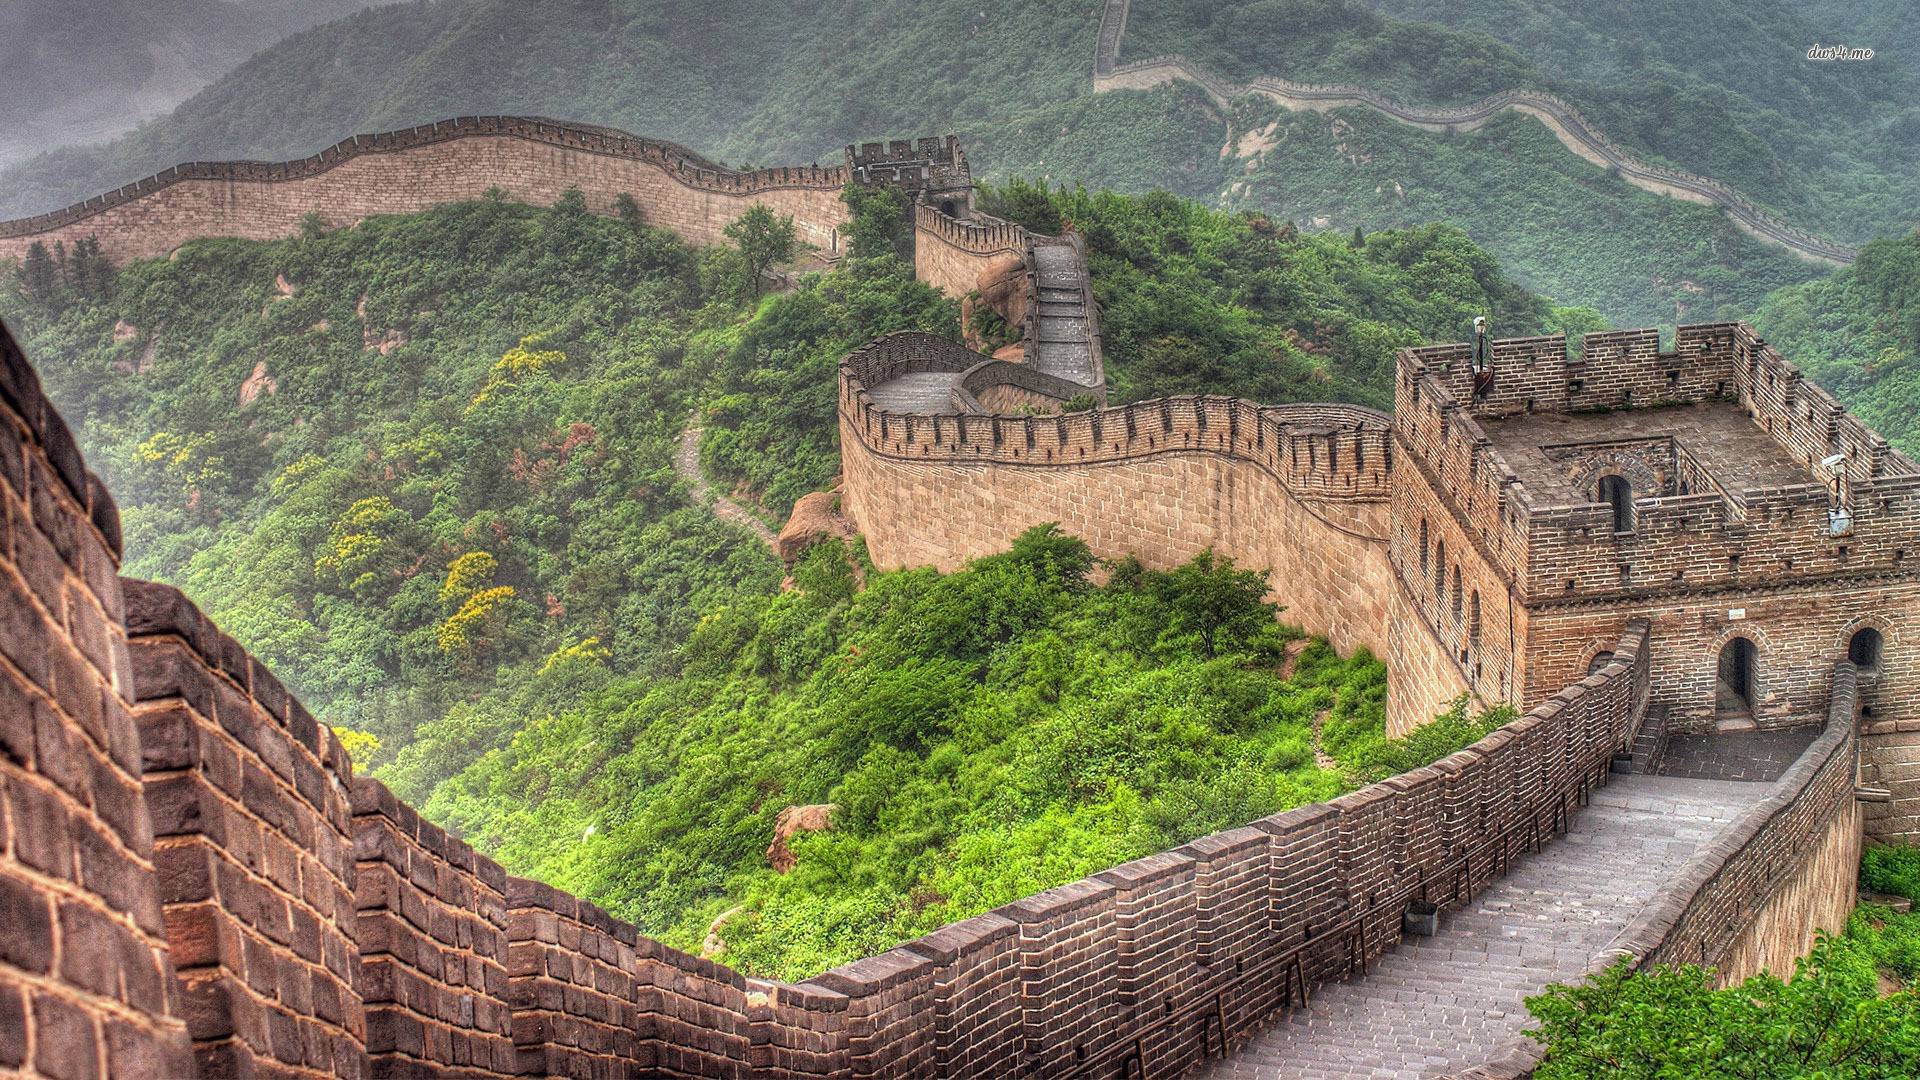 image For > Great Wall Of China Wallpaper High Resolution